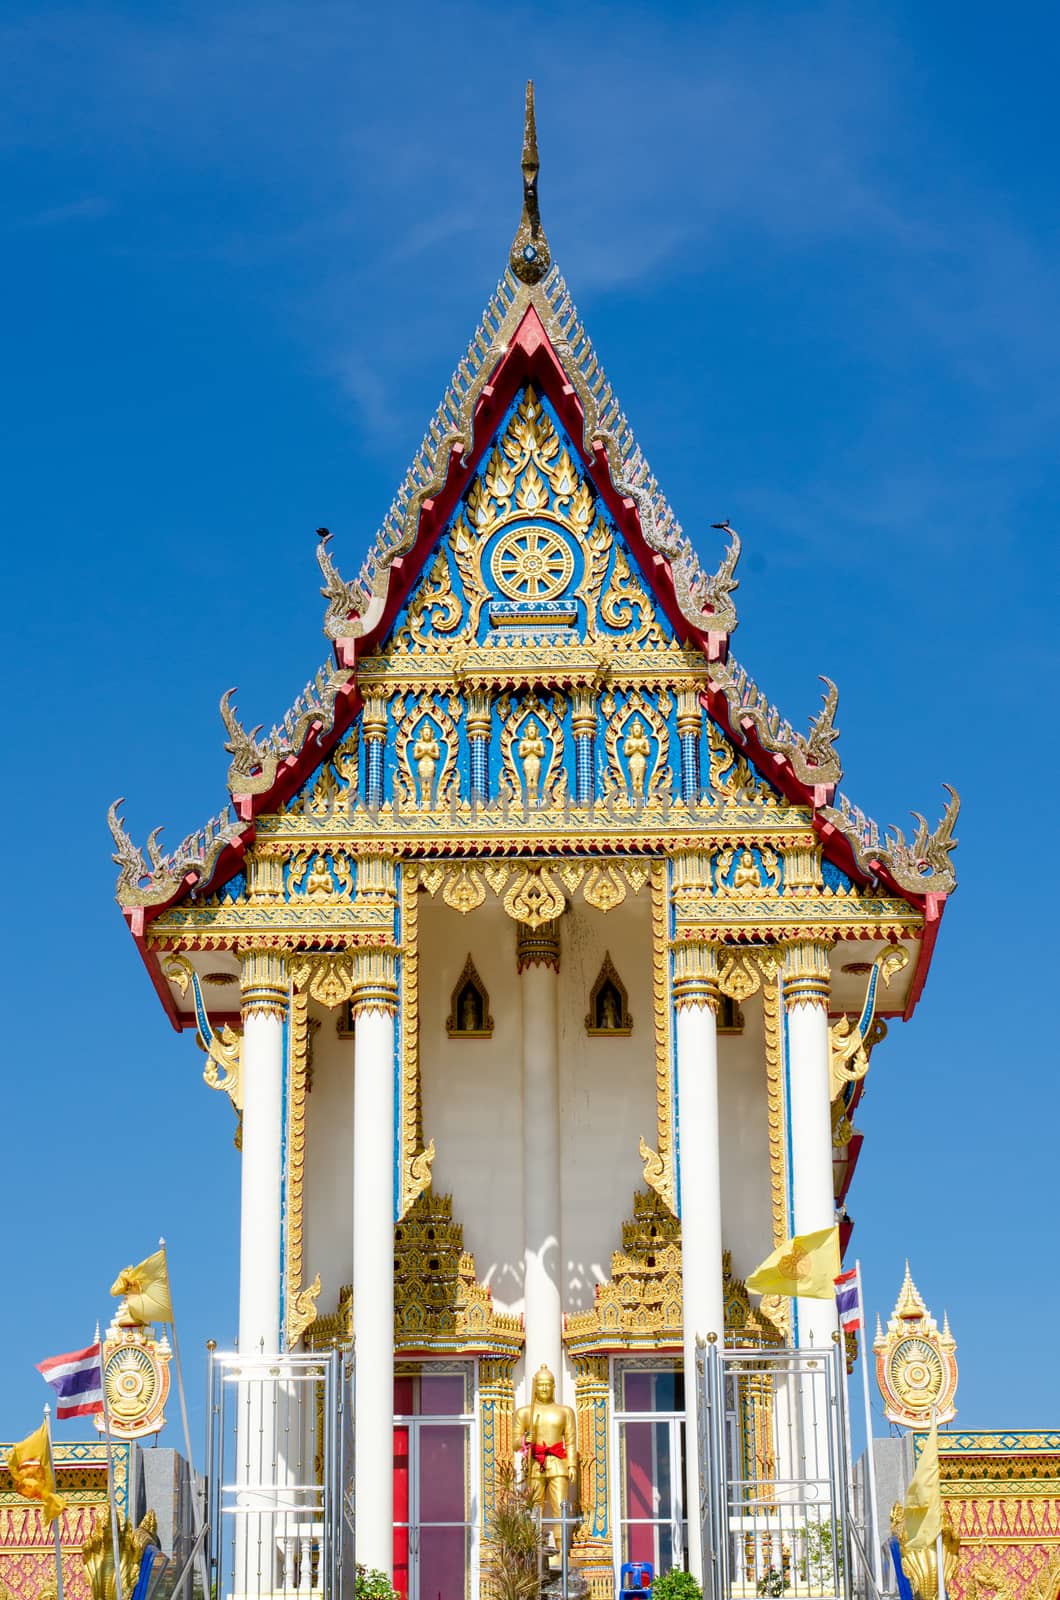 Thai temple on the blue sky background